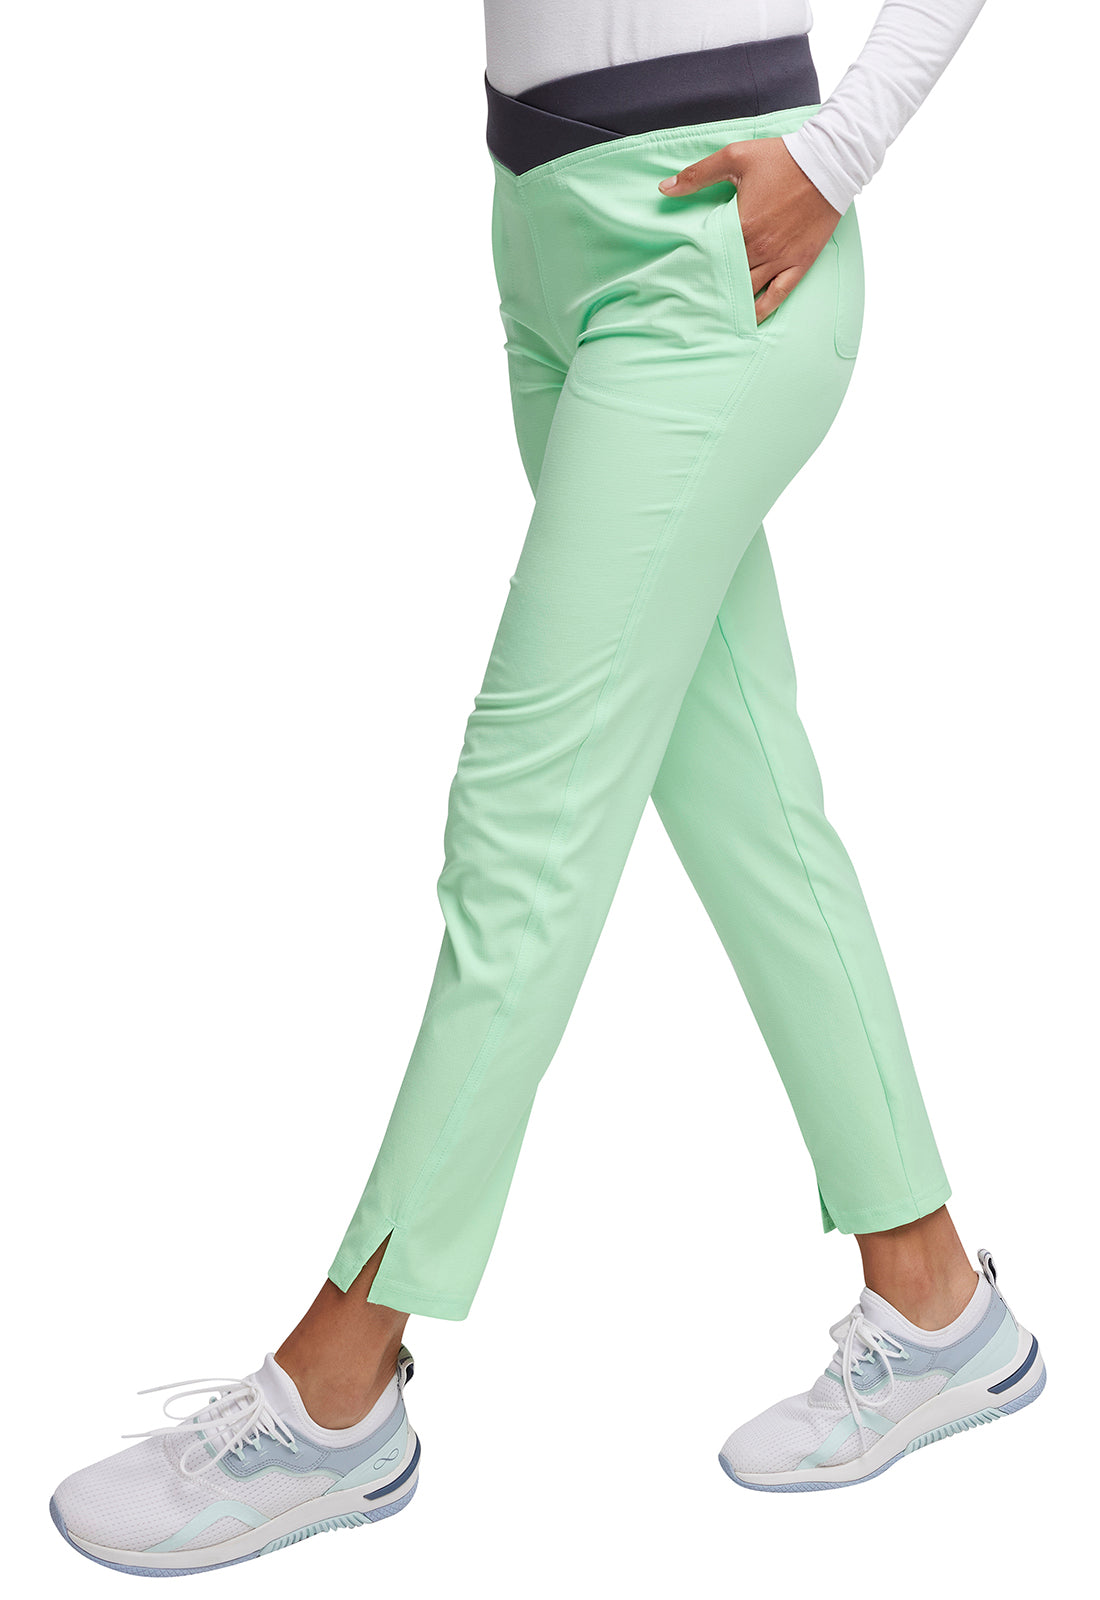 Heart & Soul Packable Pull On Pants (5 Colors Up to 3XL)